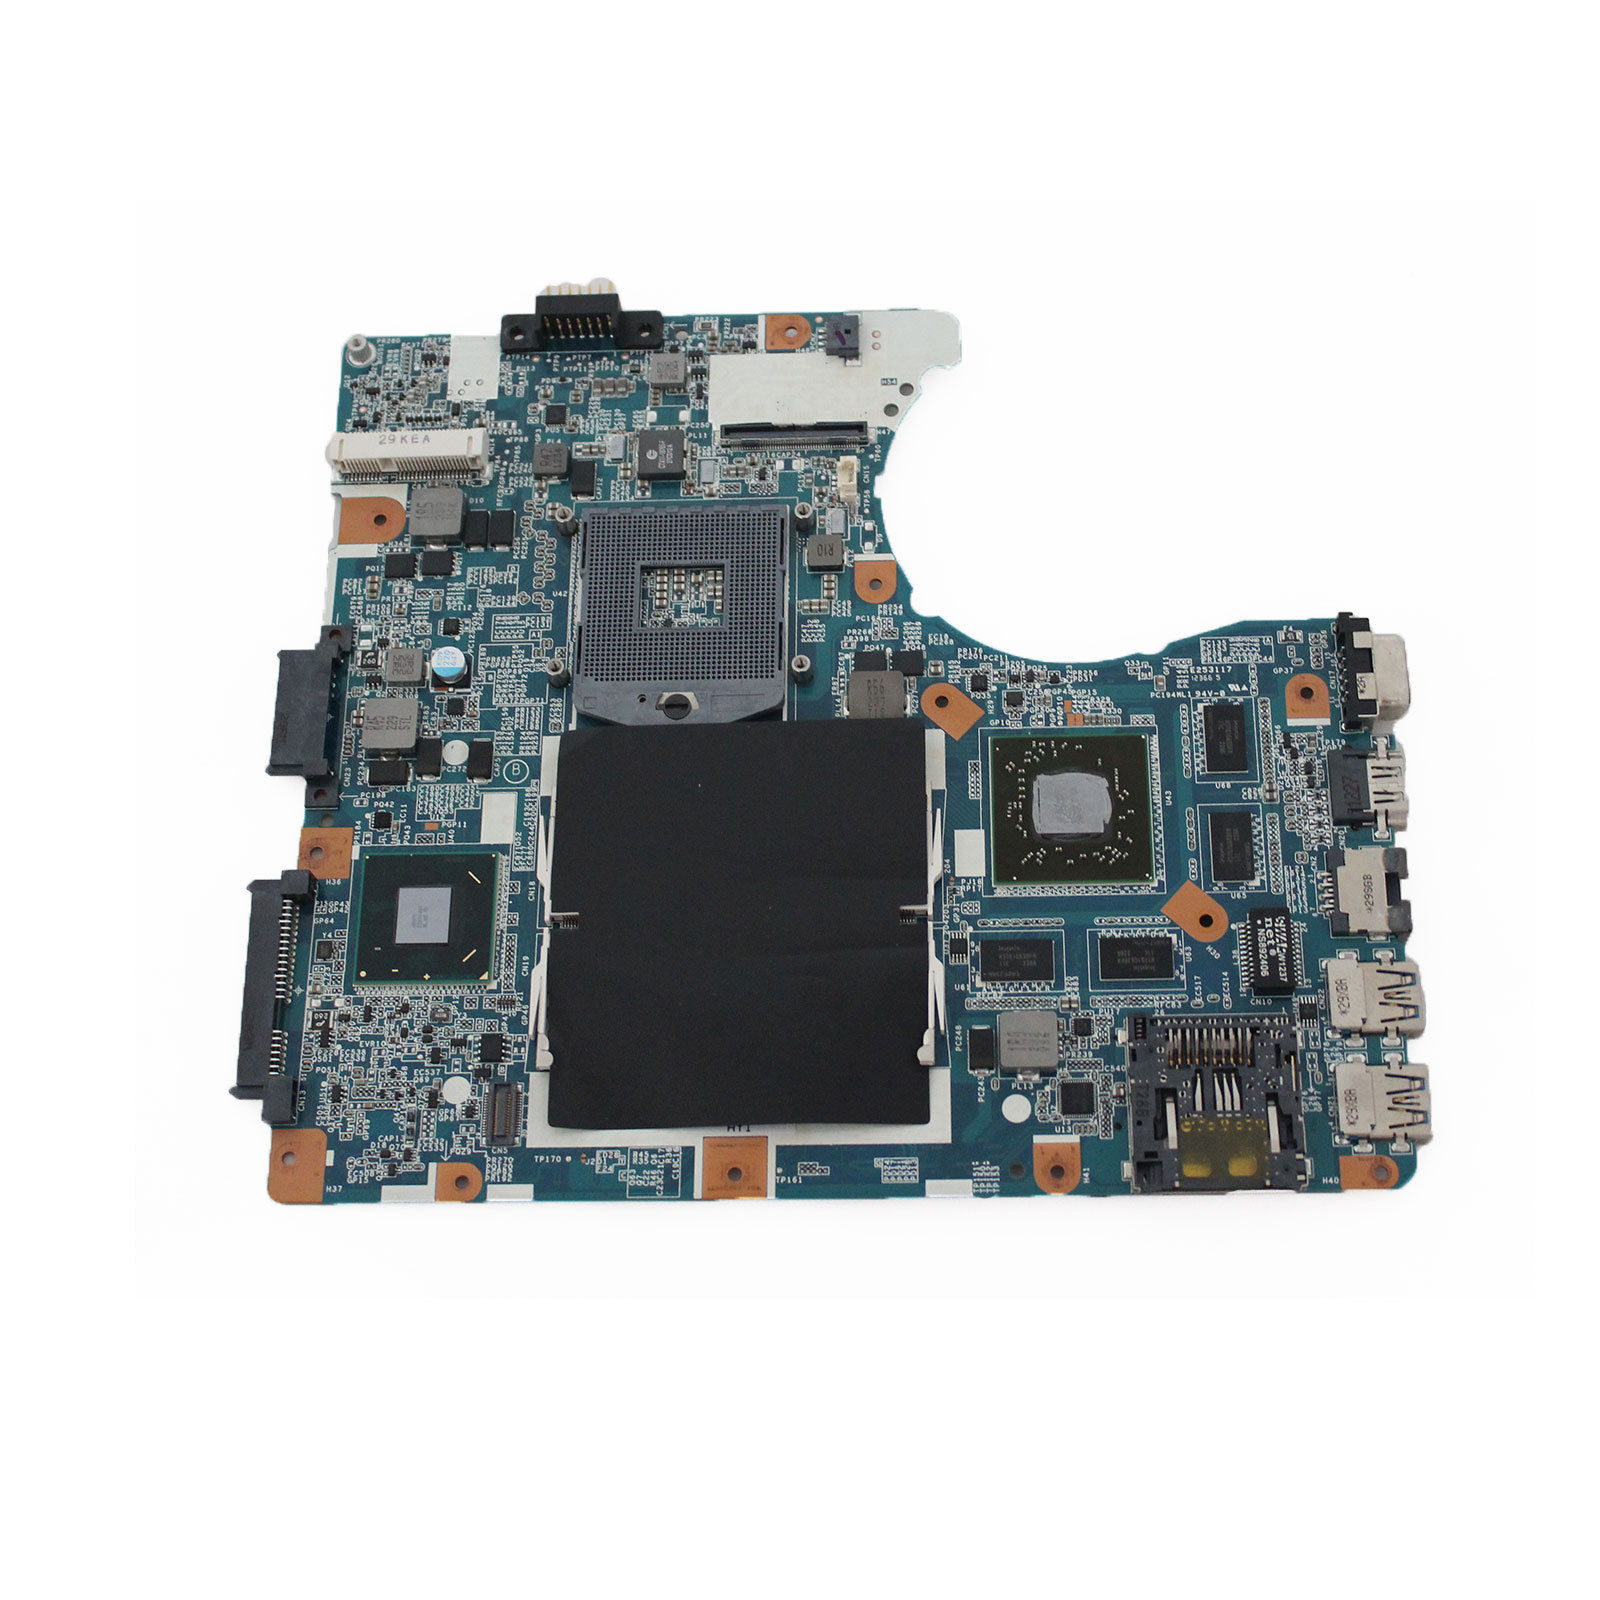 Motherboard Sony Vaio SVE14 MBX-276 Motherboard 1P-0127J00-8010 Socket:PGA-988B Article modified: Doesn't Mo